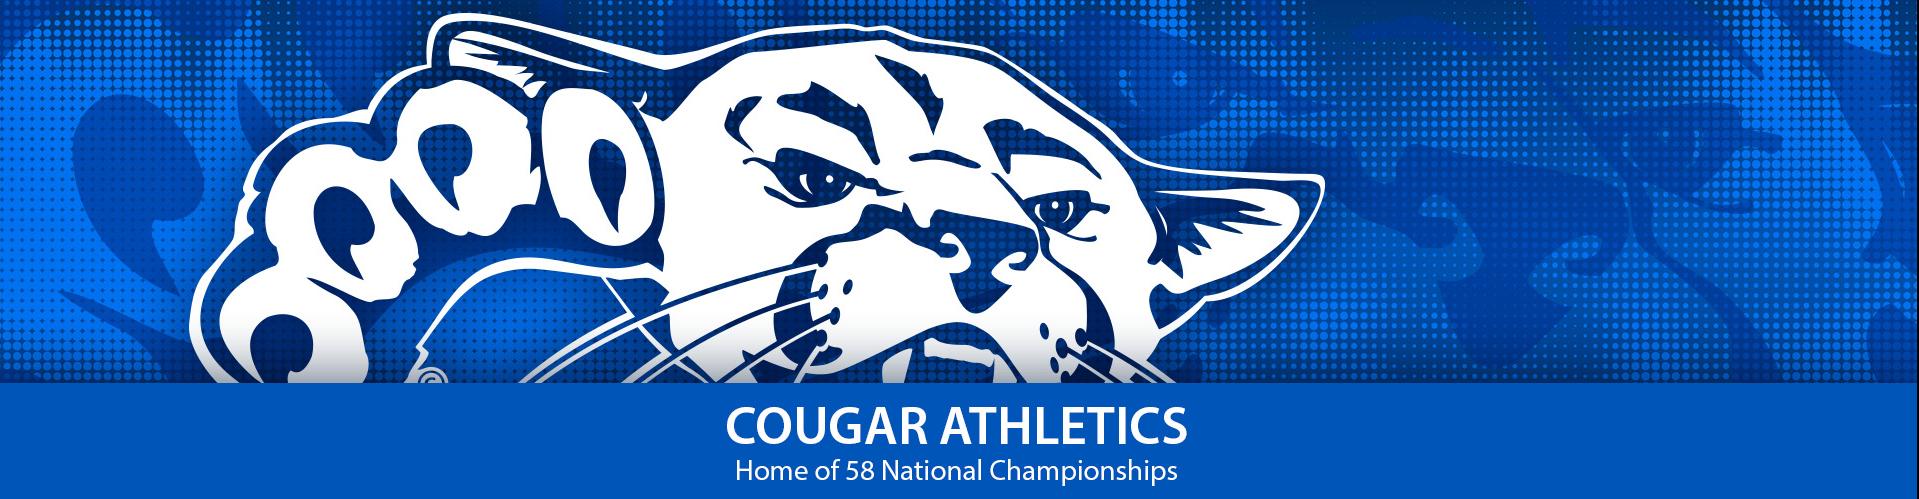 Cougar Athletics - Home of 58 National Championships